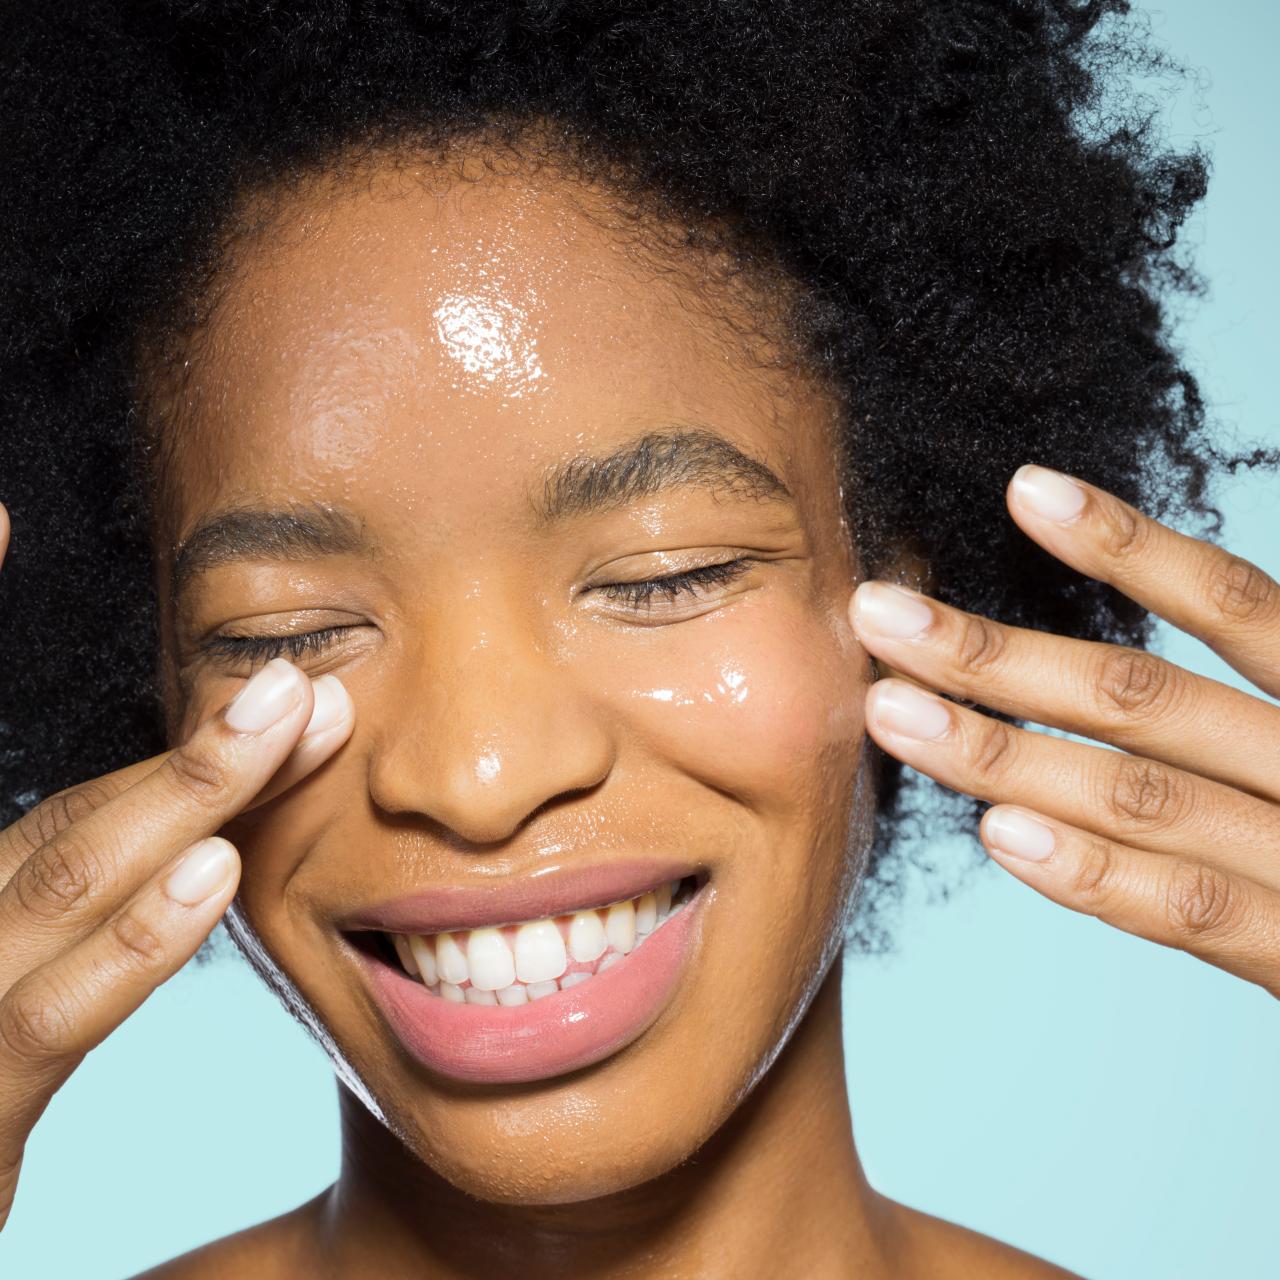 Splurge or Steal? Inexpensive Dupes for Popular High-End Skincare